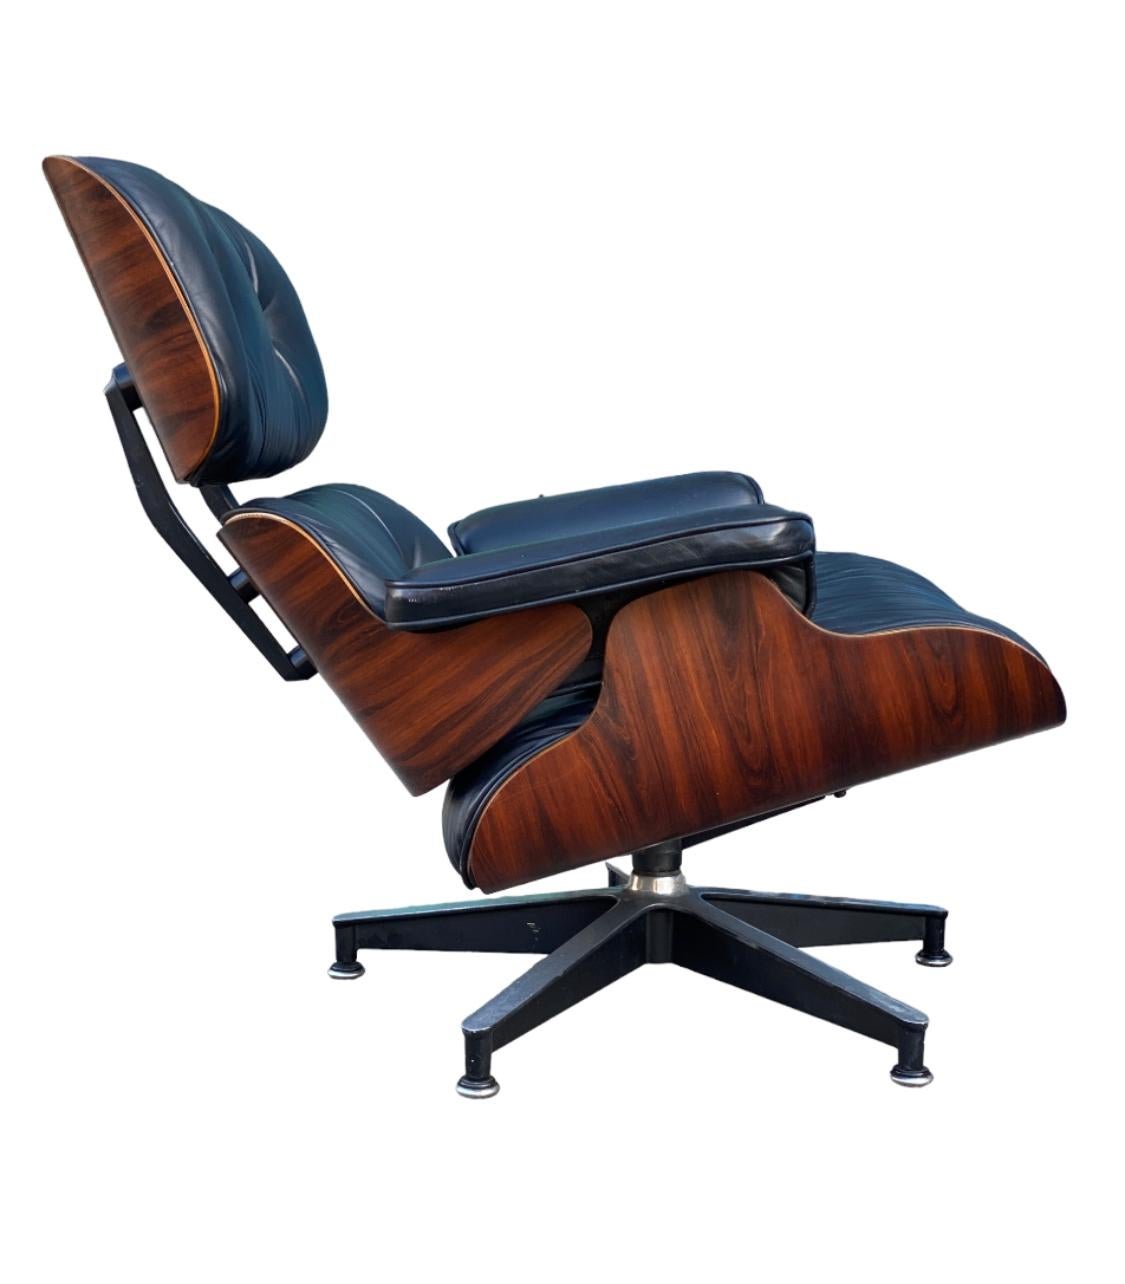 American Vintage Restored Herman Miller Eames Lounge Chair and Ottoman